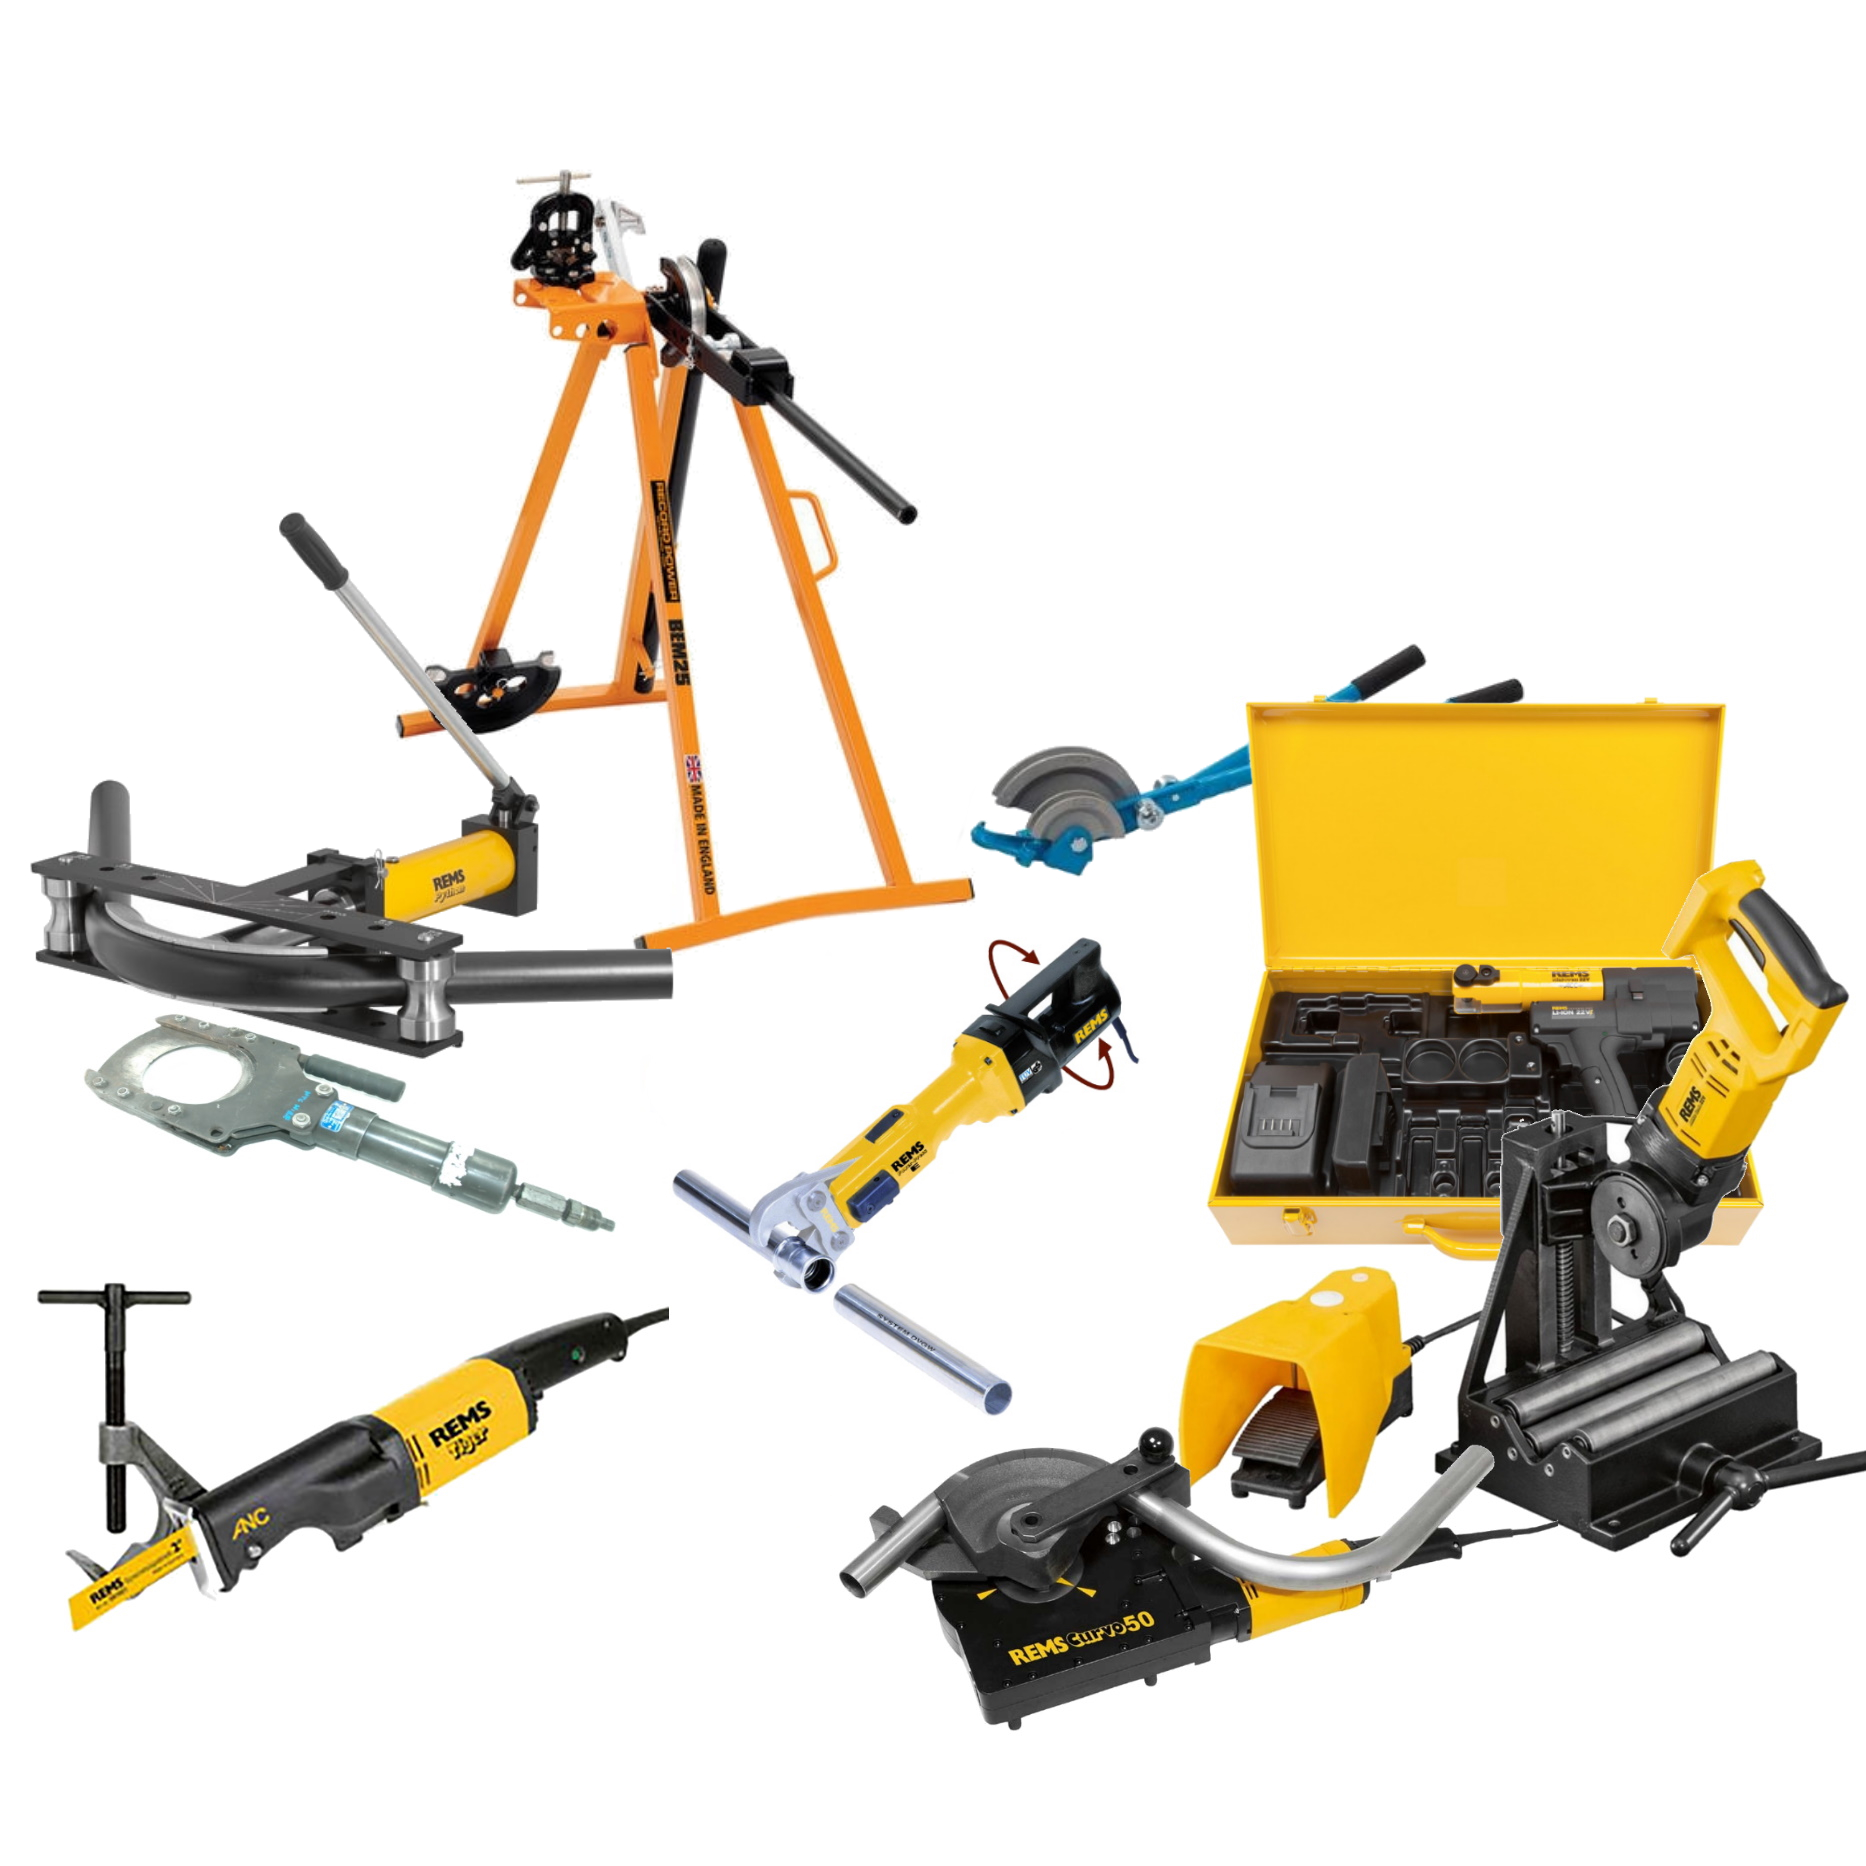 Mechanical, Electrical and Plumbing Tool Hire